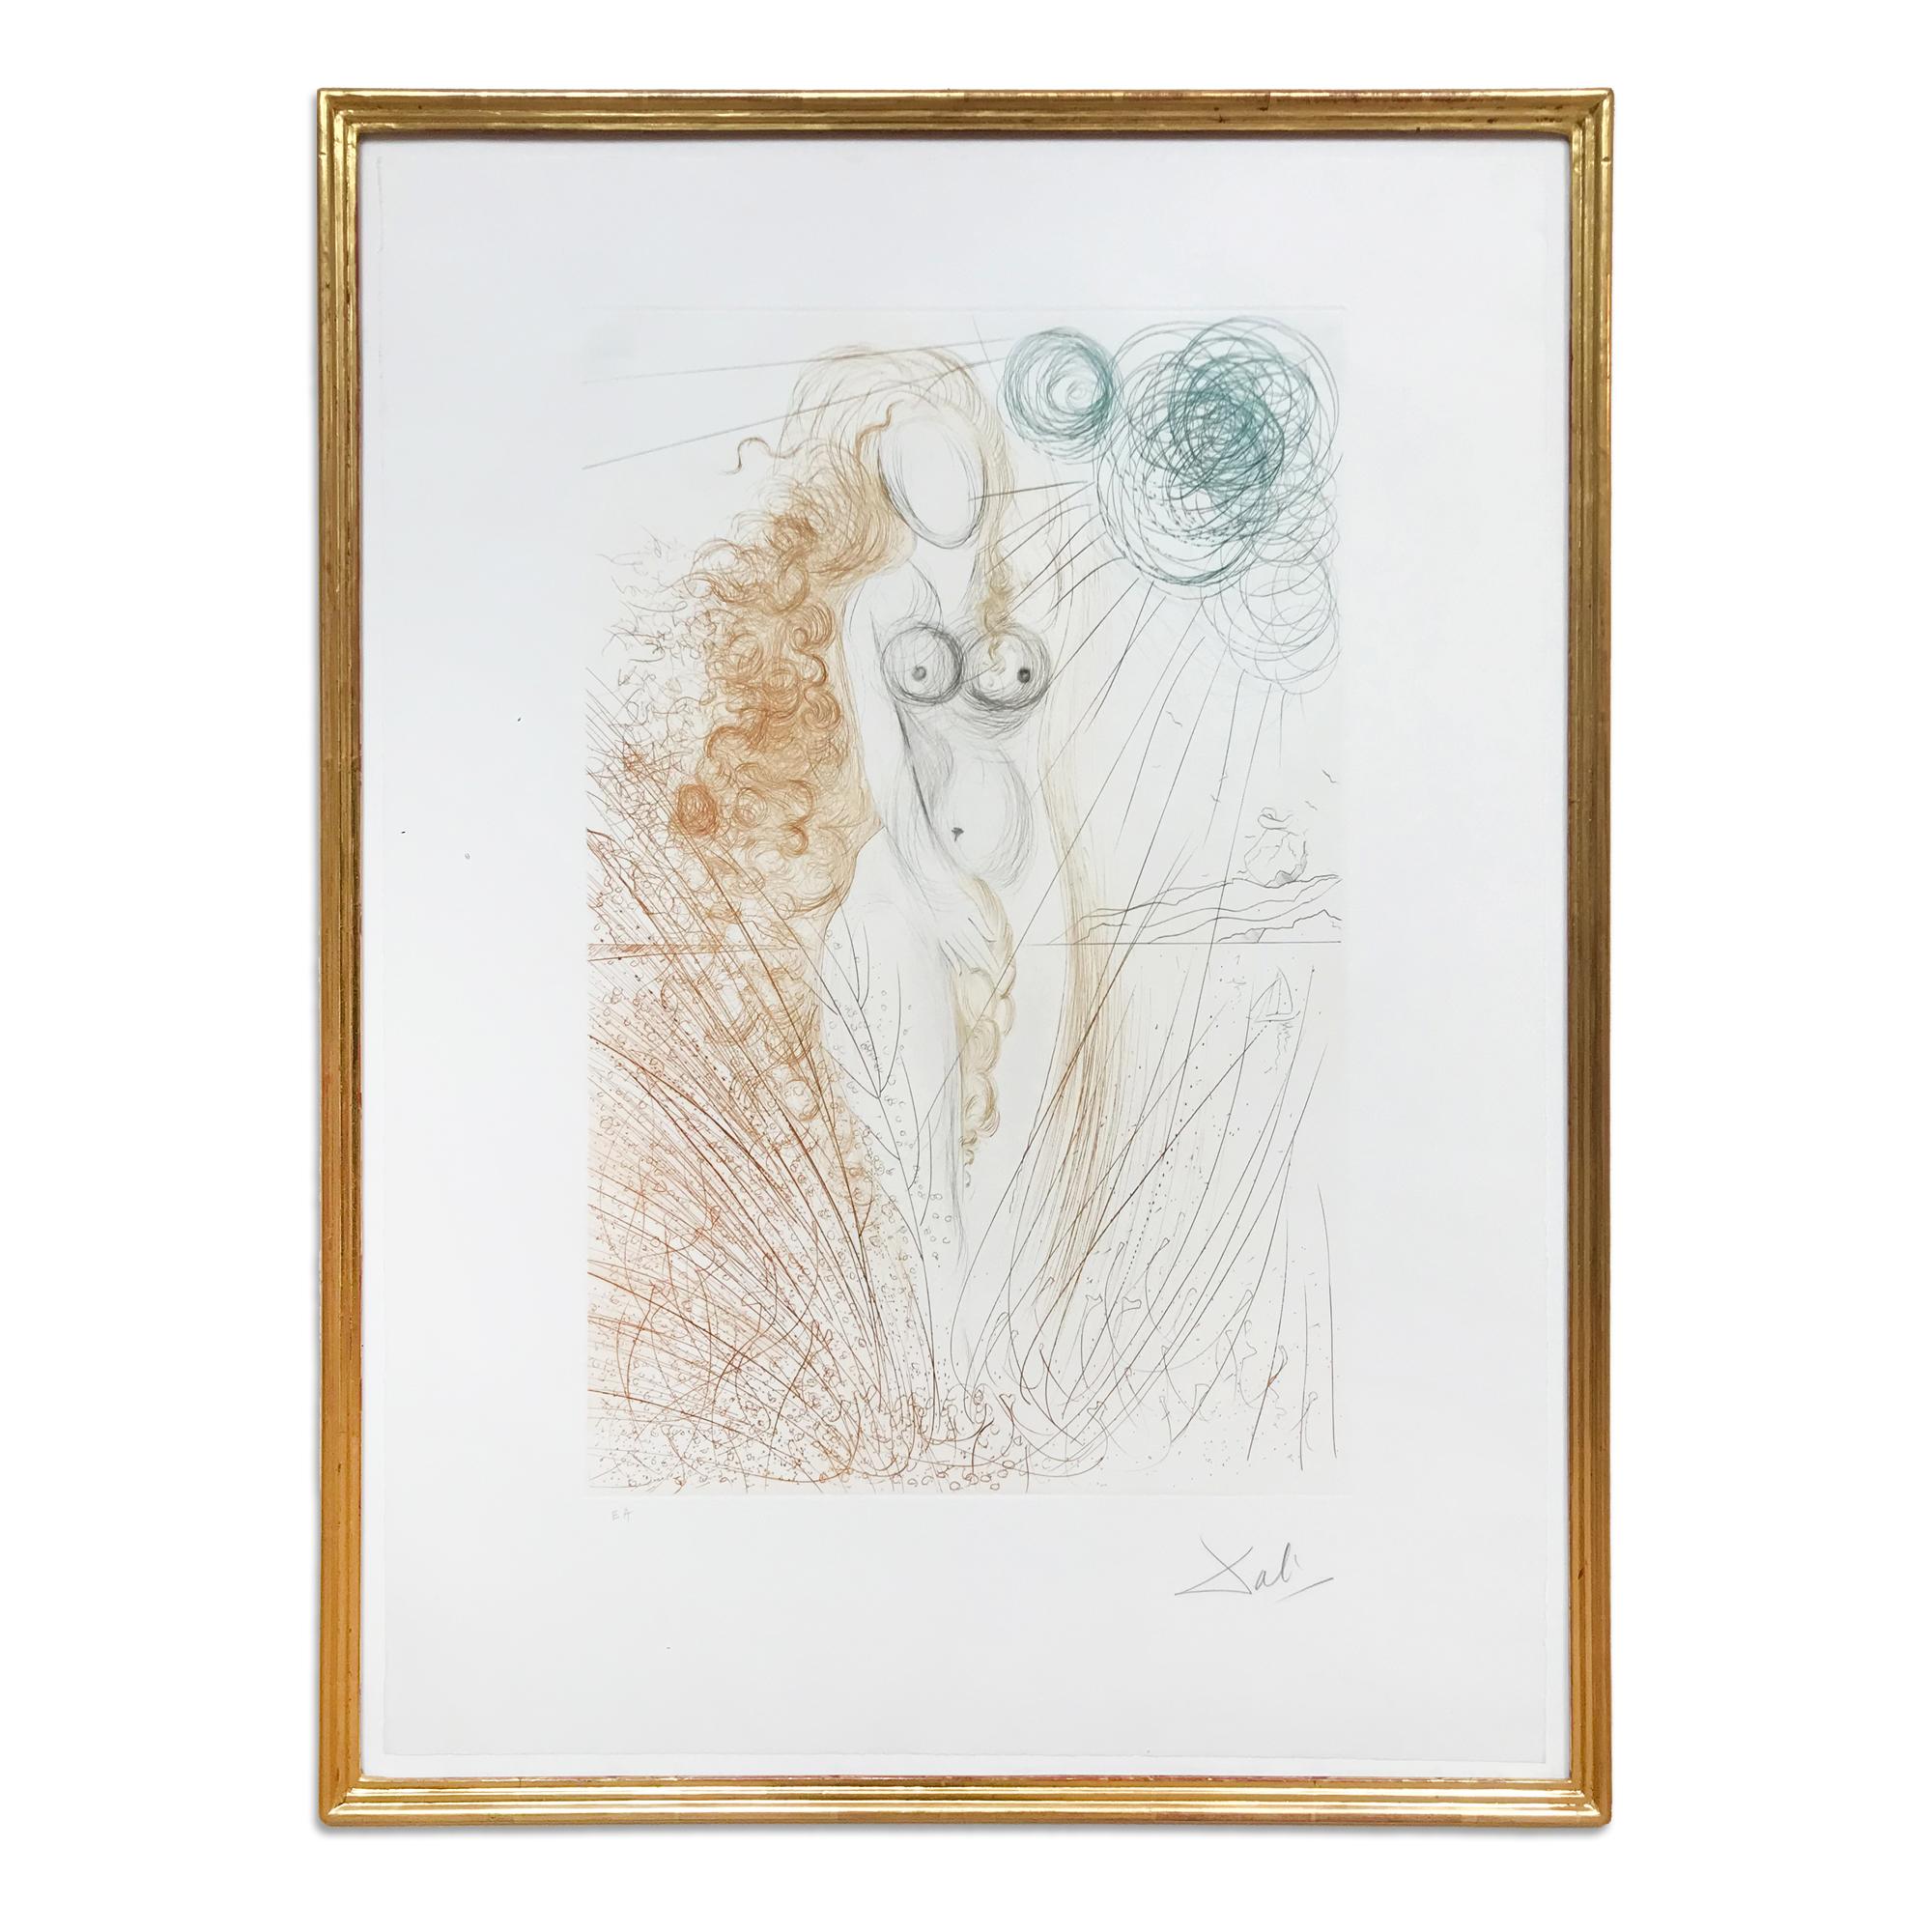 Salvador Dalí Figurative Print - The Birth of Venus, Hand Signed Etching, Surrealism, Modern Art, 20th Century